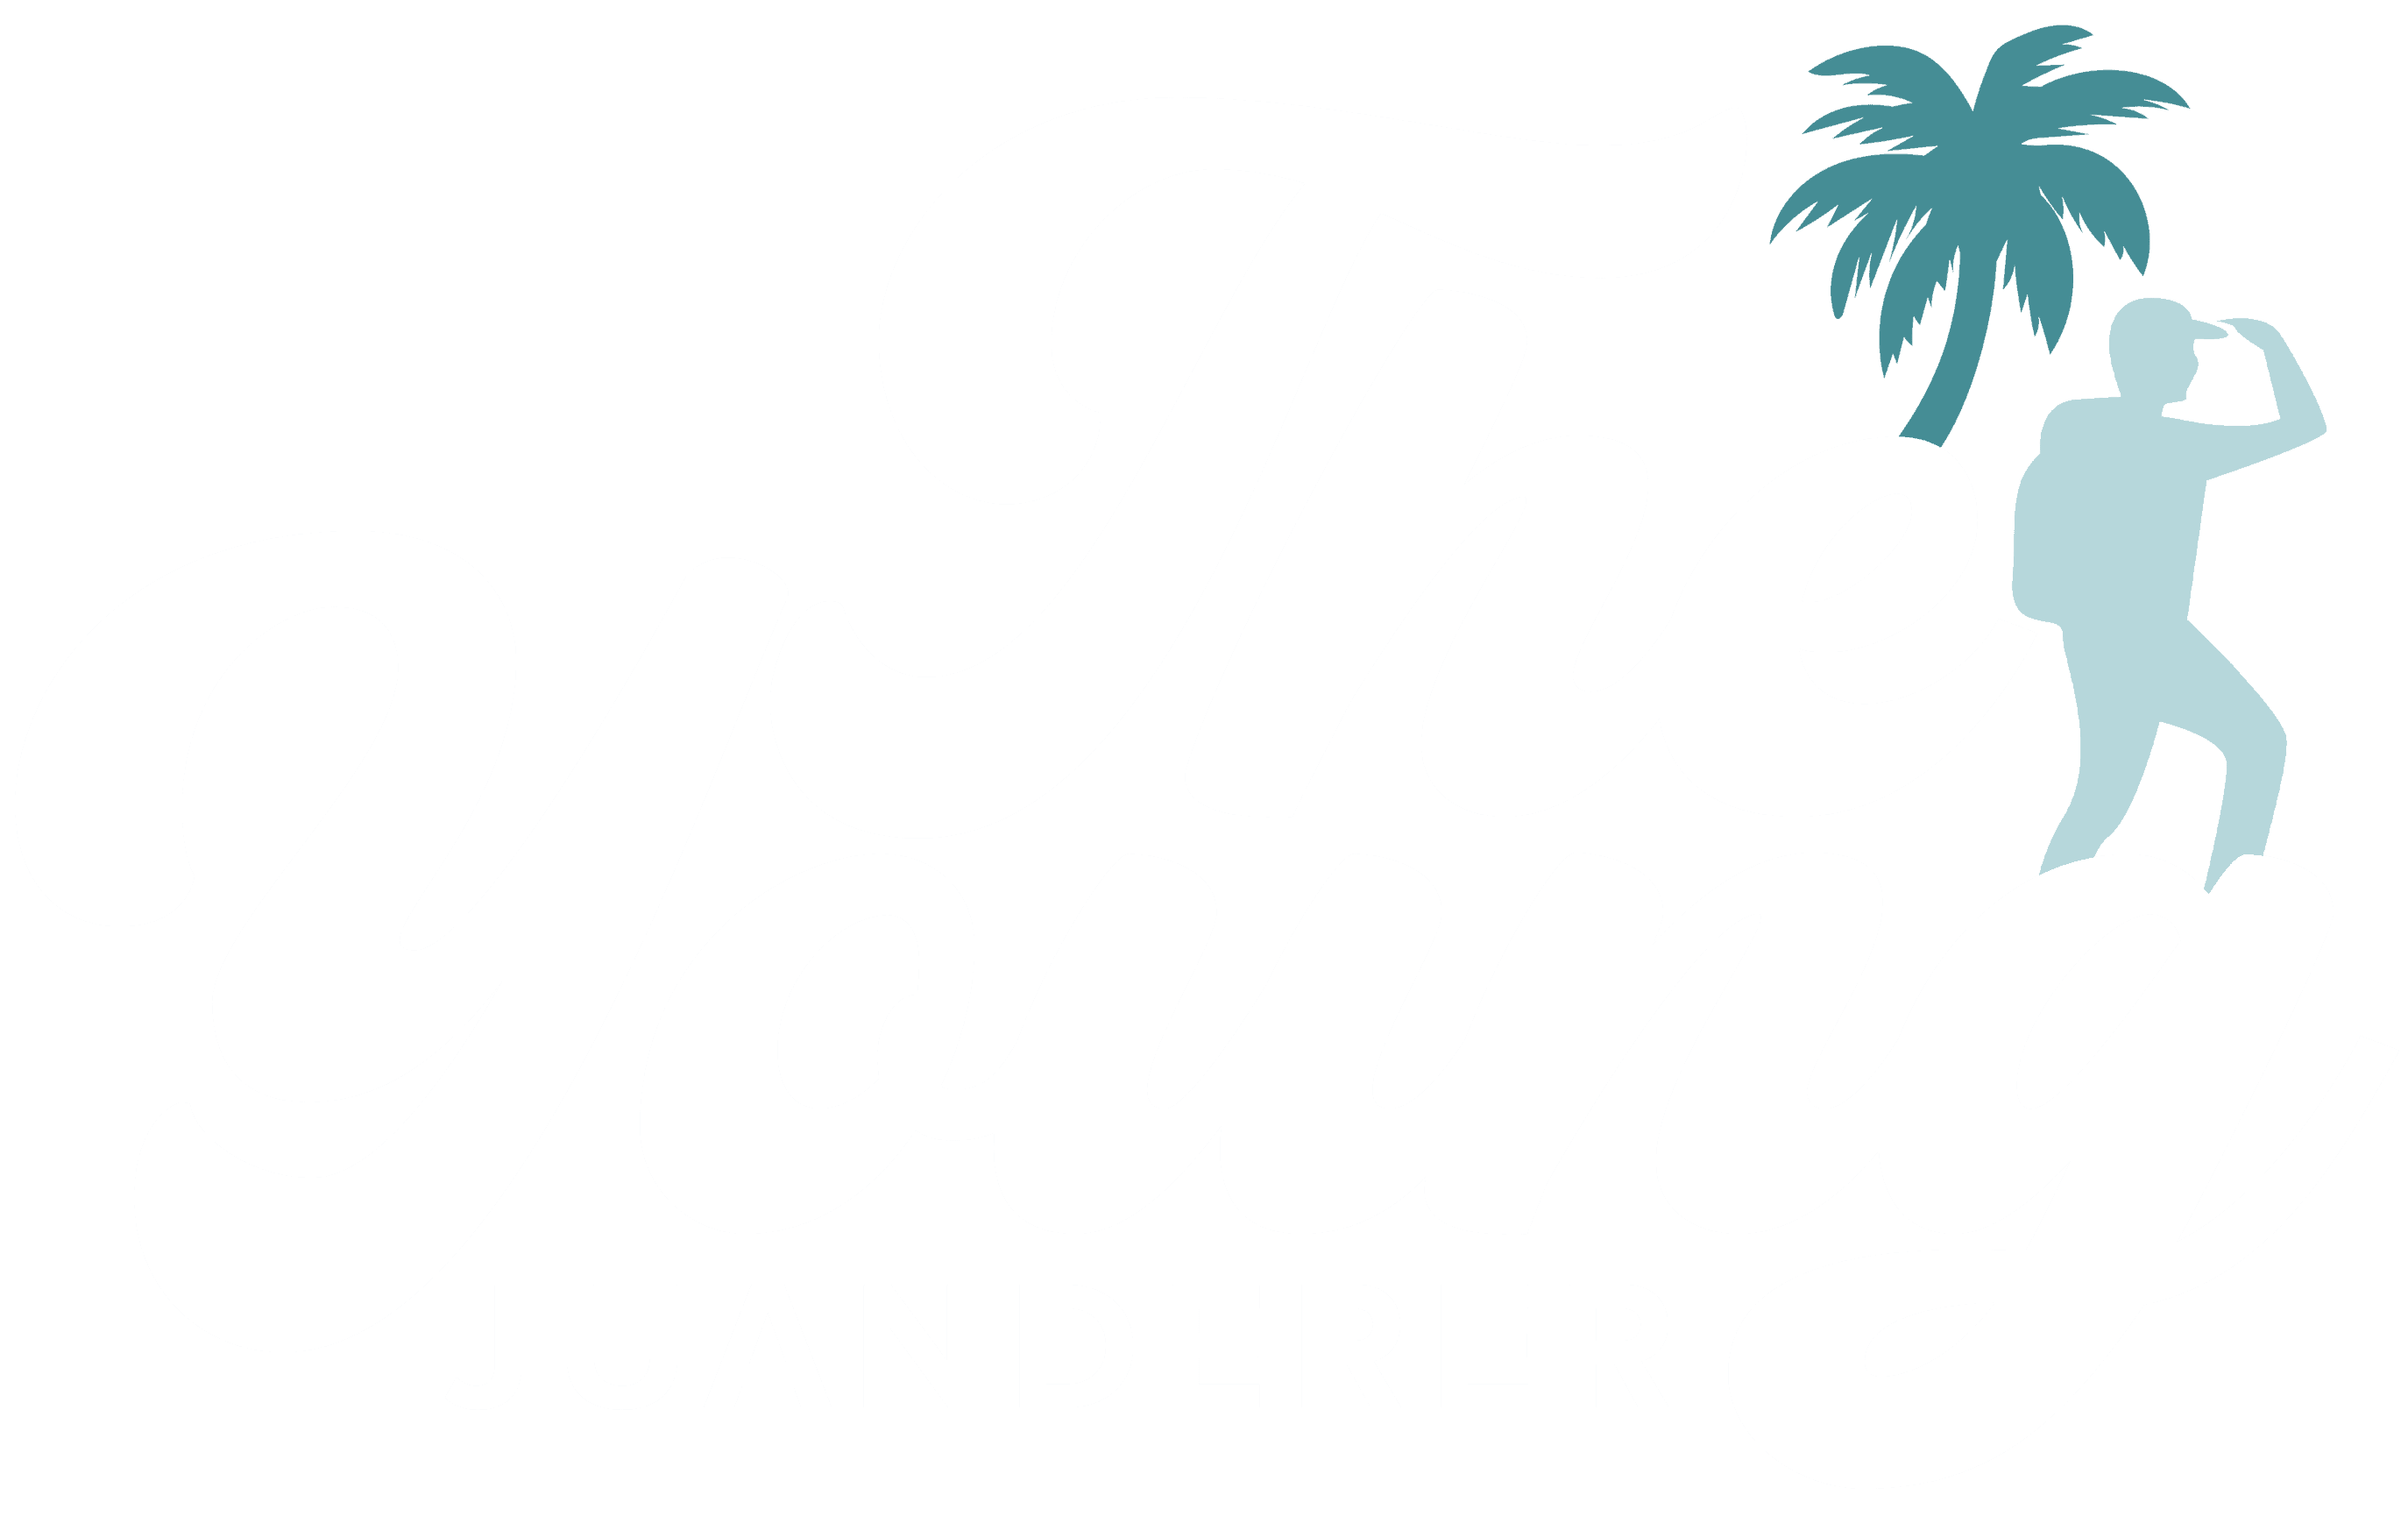 The Young Juanderer logo white